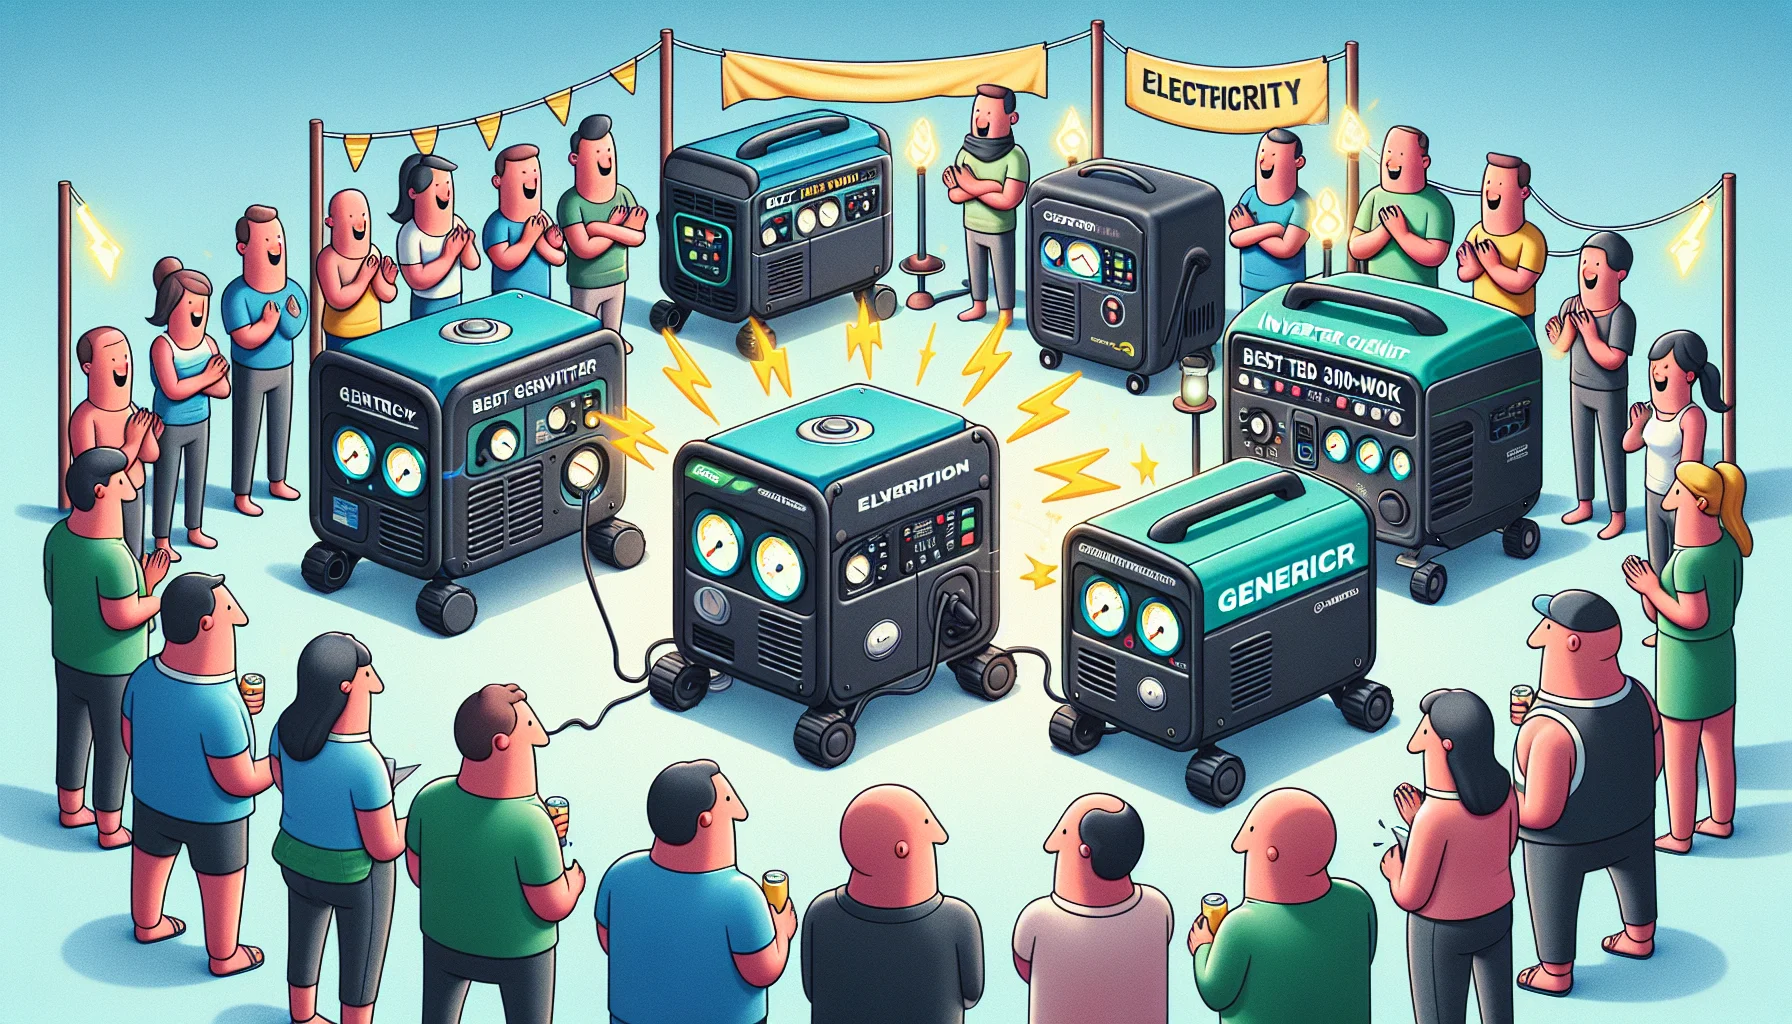 Create an image of a humorous scene that features a range of best 3000-Watt Inverter Generators. They are anthropomorphized and interacting with each other, as if they are having a contest to see who can generate the most electricity. There are visual indications on each generator to signify the electricity they produce like sparkling light or glowing dials. All this is taking place in an outdoor setting, convincingly signaling the power and efficiency of these generators while inspiring people to create their own electricity. Some onlookers, represented as a diverse group of men and women of different descents, stand around observing and cheering the generators. Please ensure the scene is lively, inviting and humorous.